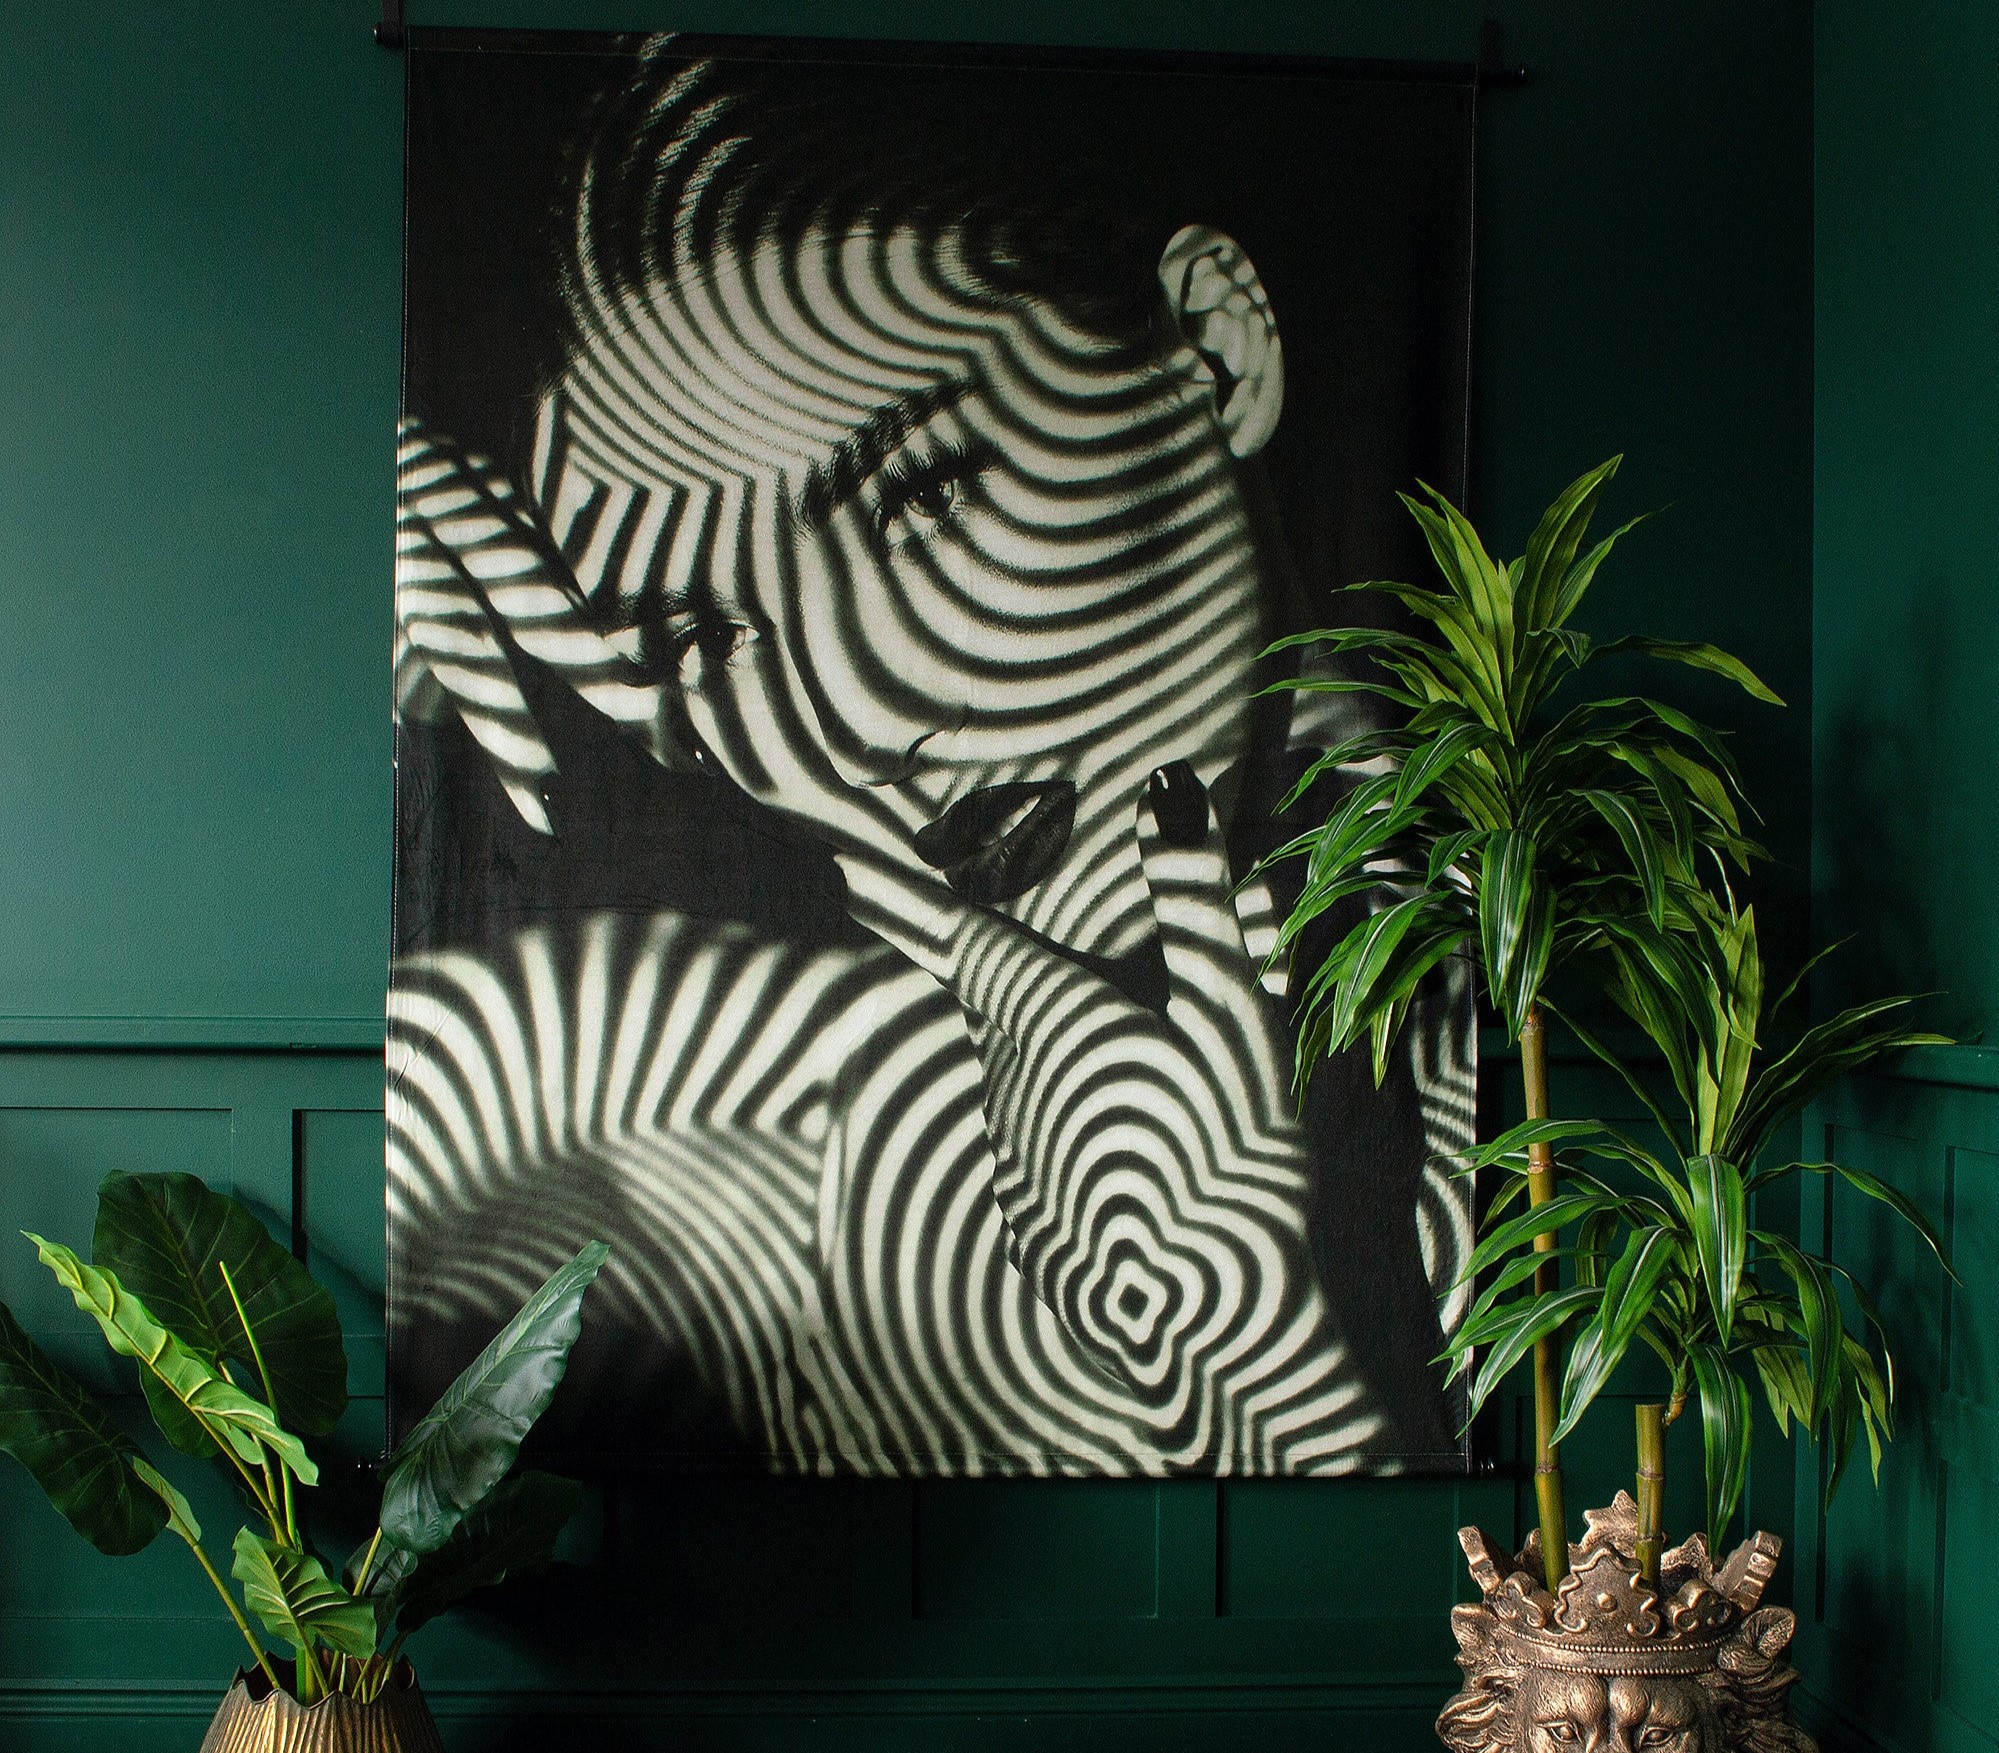 A black and white art piece of a woman's face with striped patterns hanging on a green wall